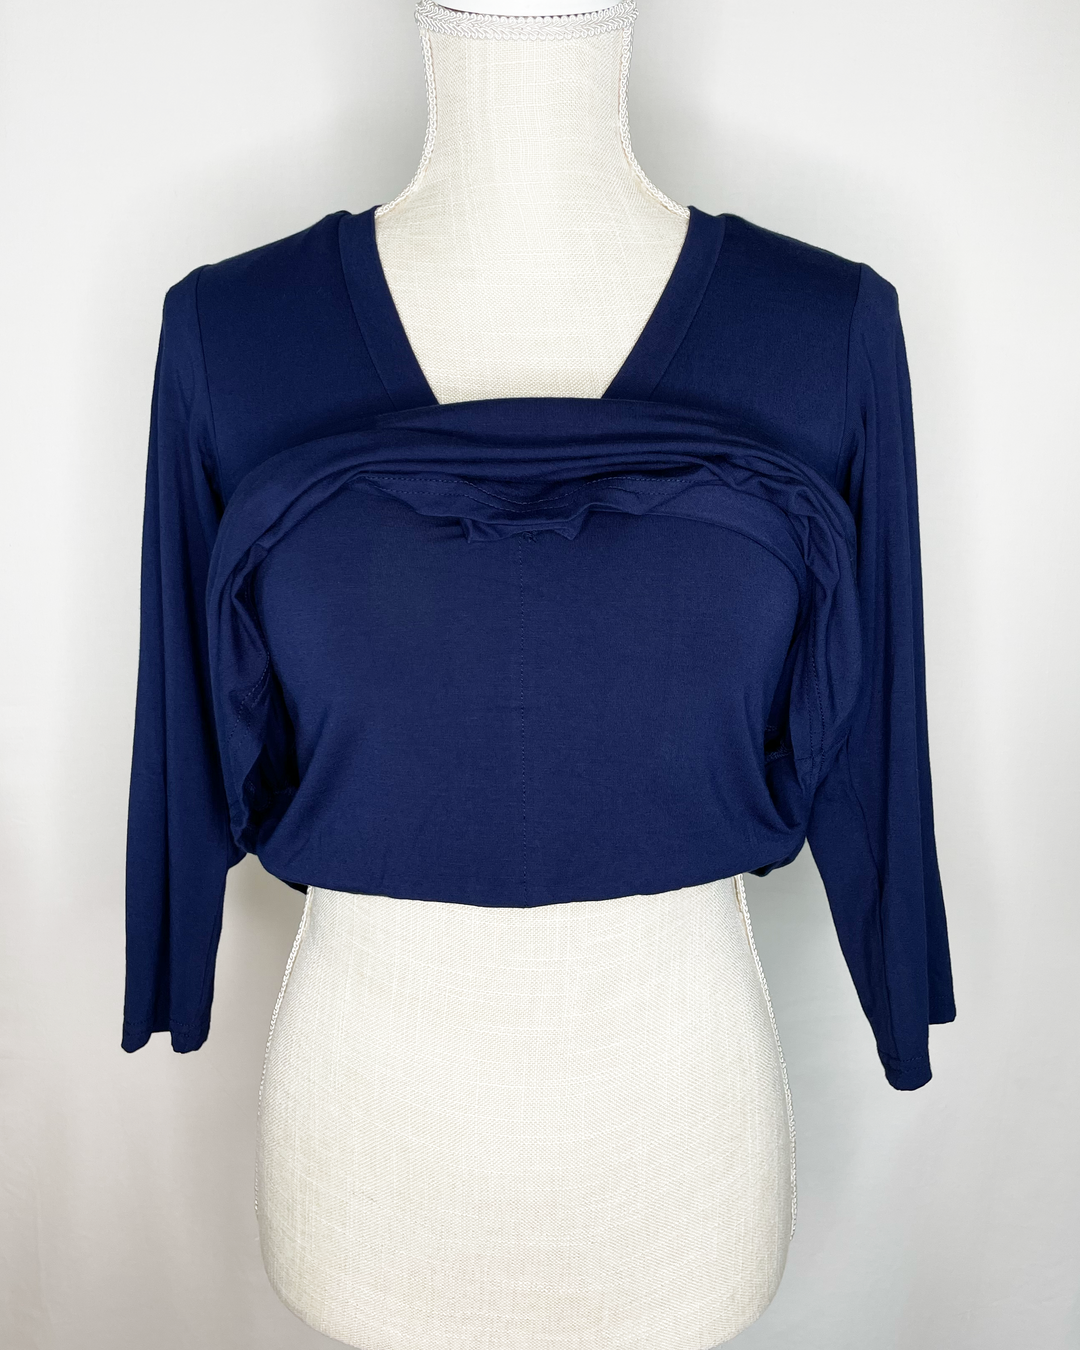 EILEEN V-Pleat Braless Bamboo 3/4 Sleeve Top inner layer view - True Navy color